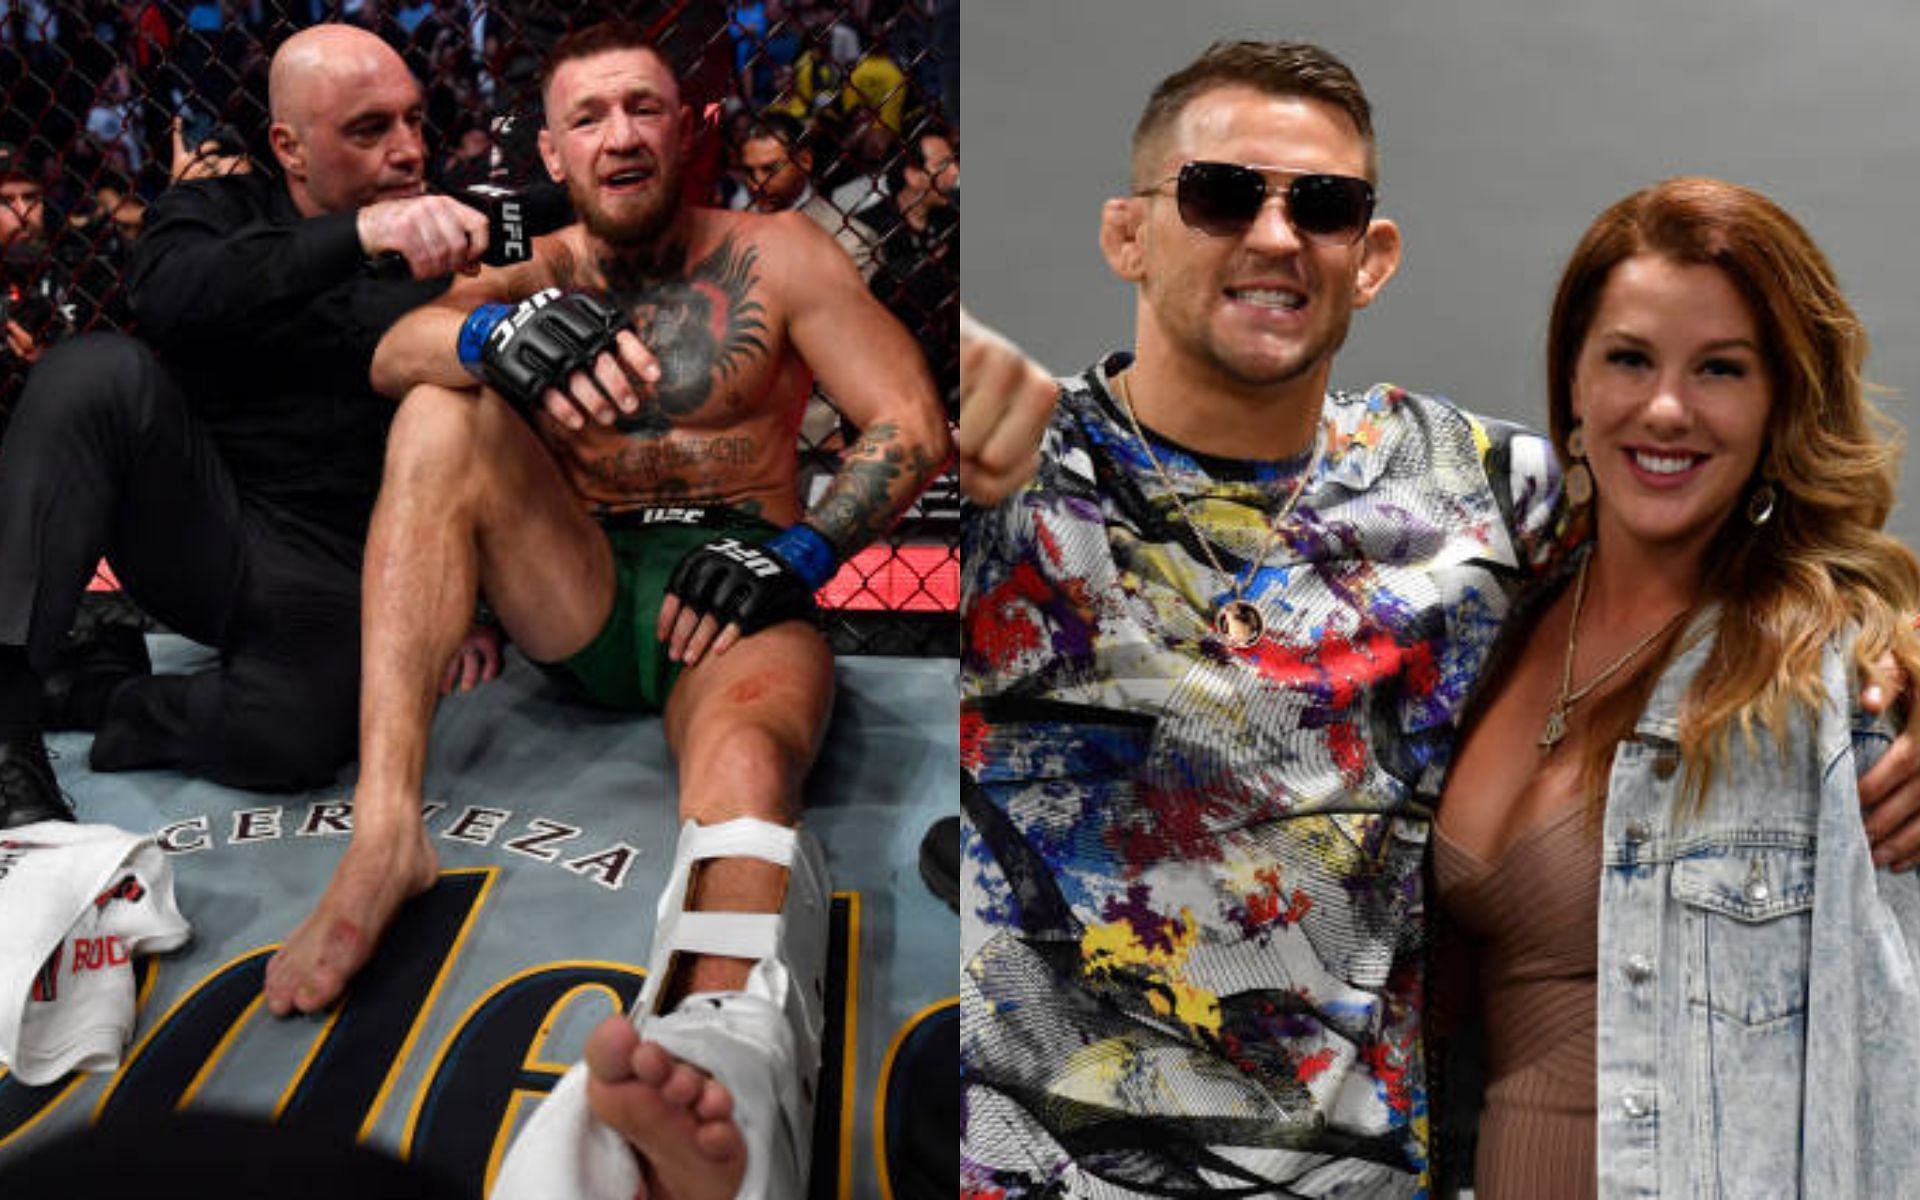 Conor McGregor (left) targets Dustin Poirier and wife Julie (right) [Image credits: Getty Images]